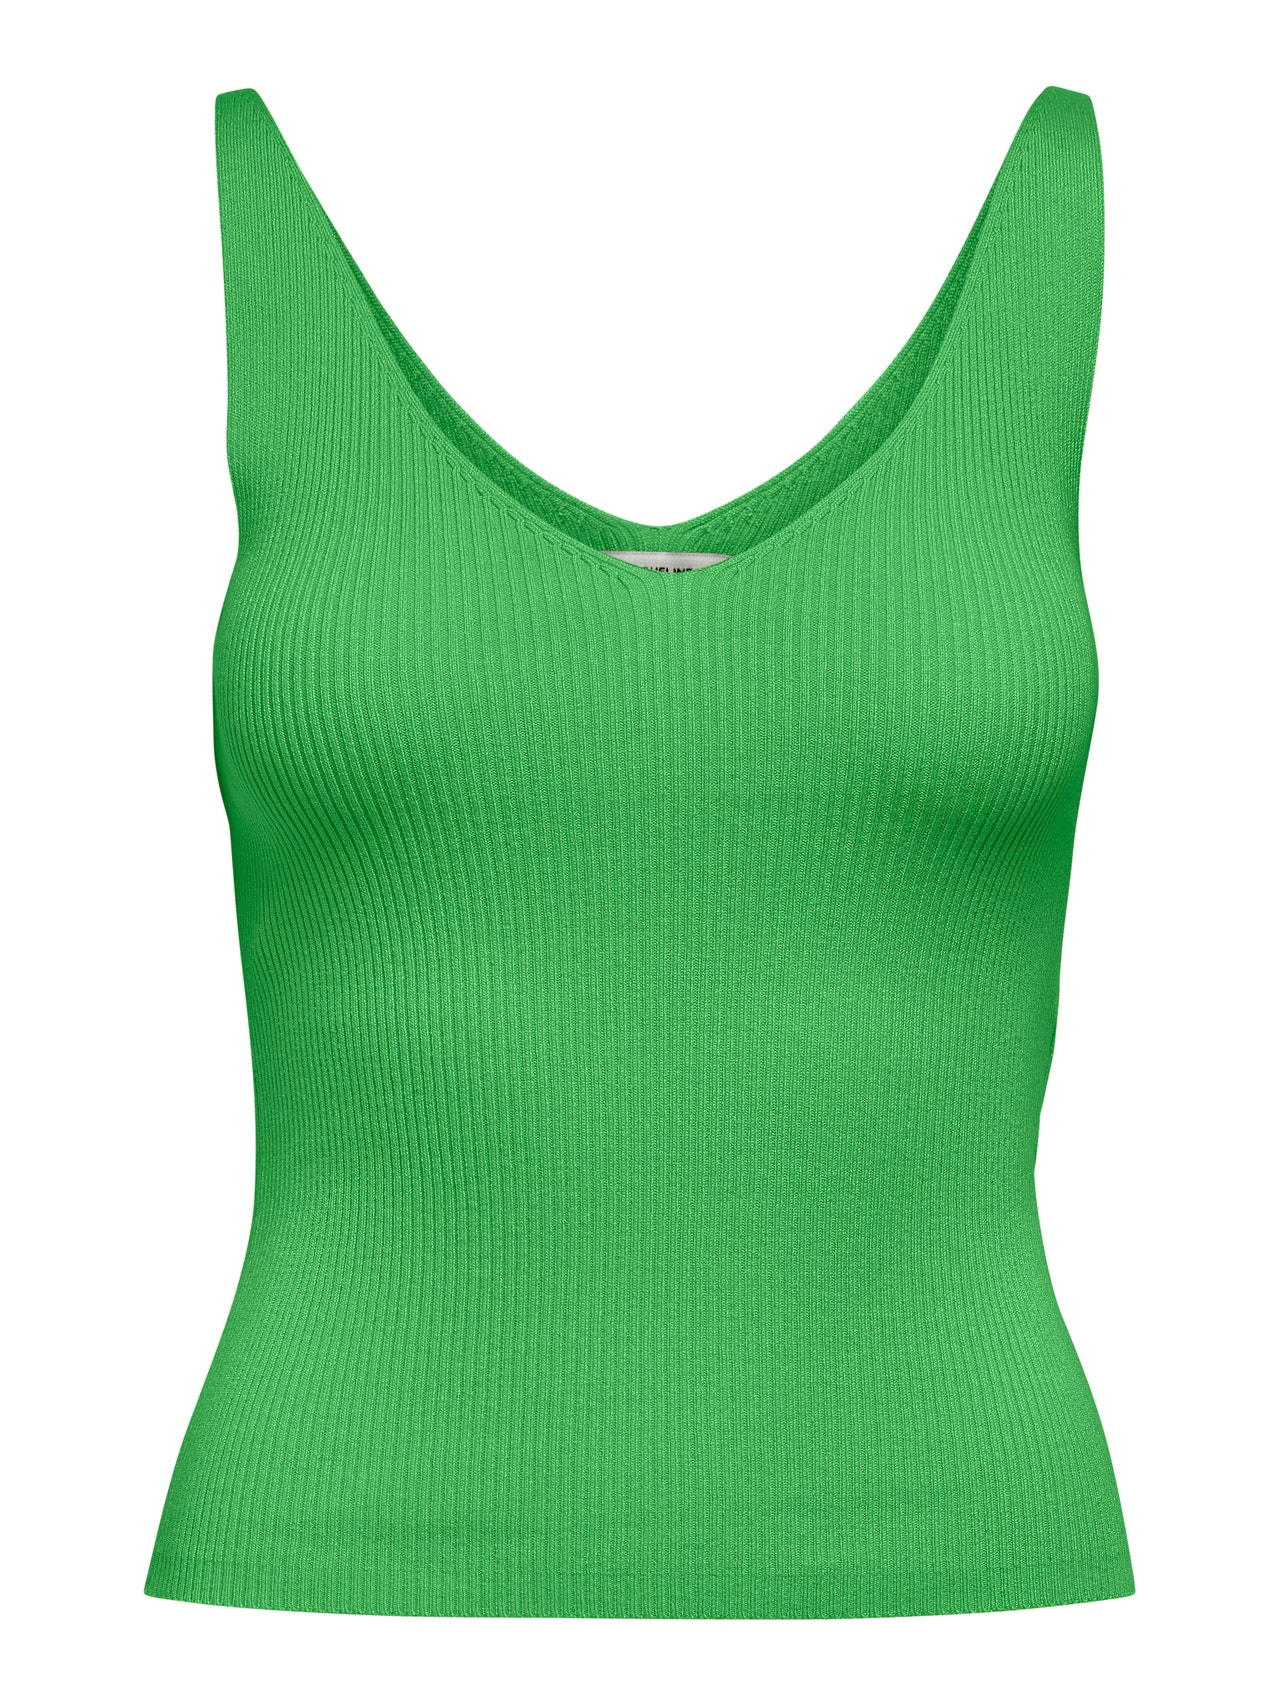 ONLY V-neck Top -Kelly Green - 15180497